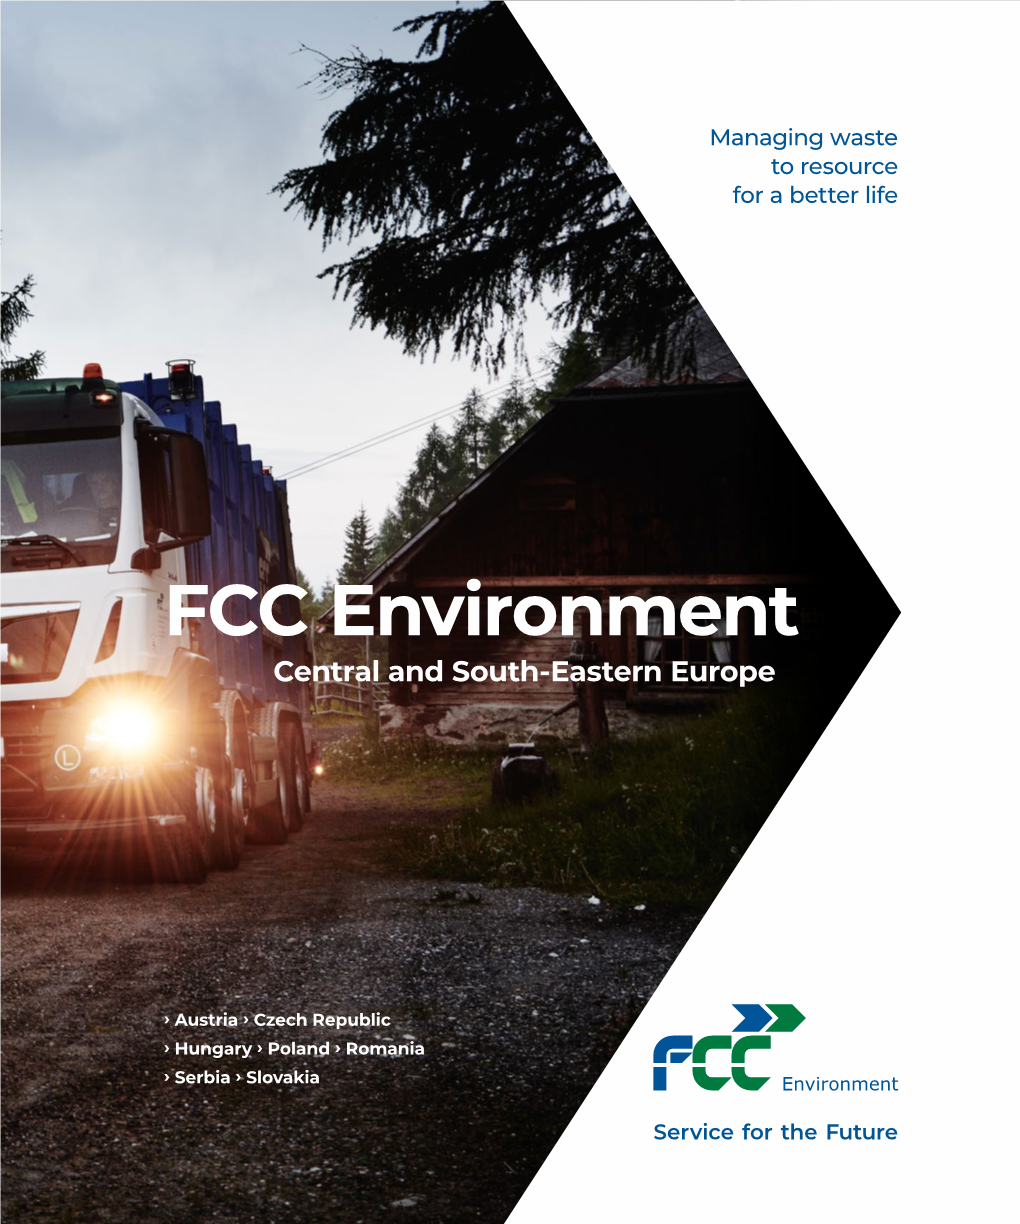 FCC Environment Central and South-Eastern Europe